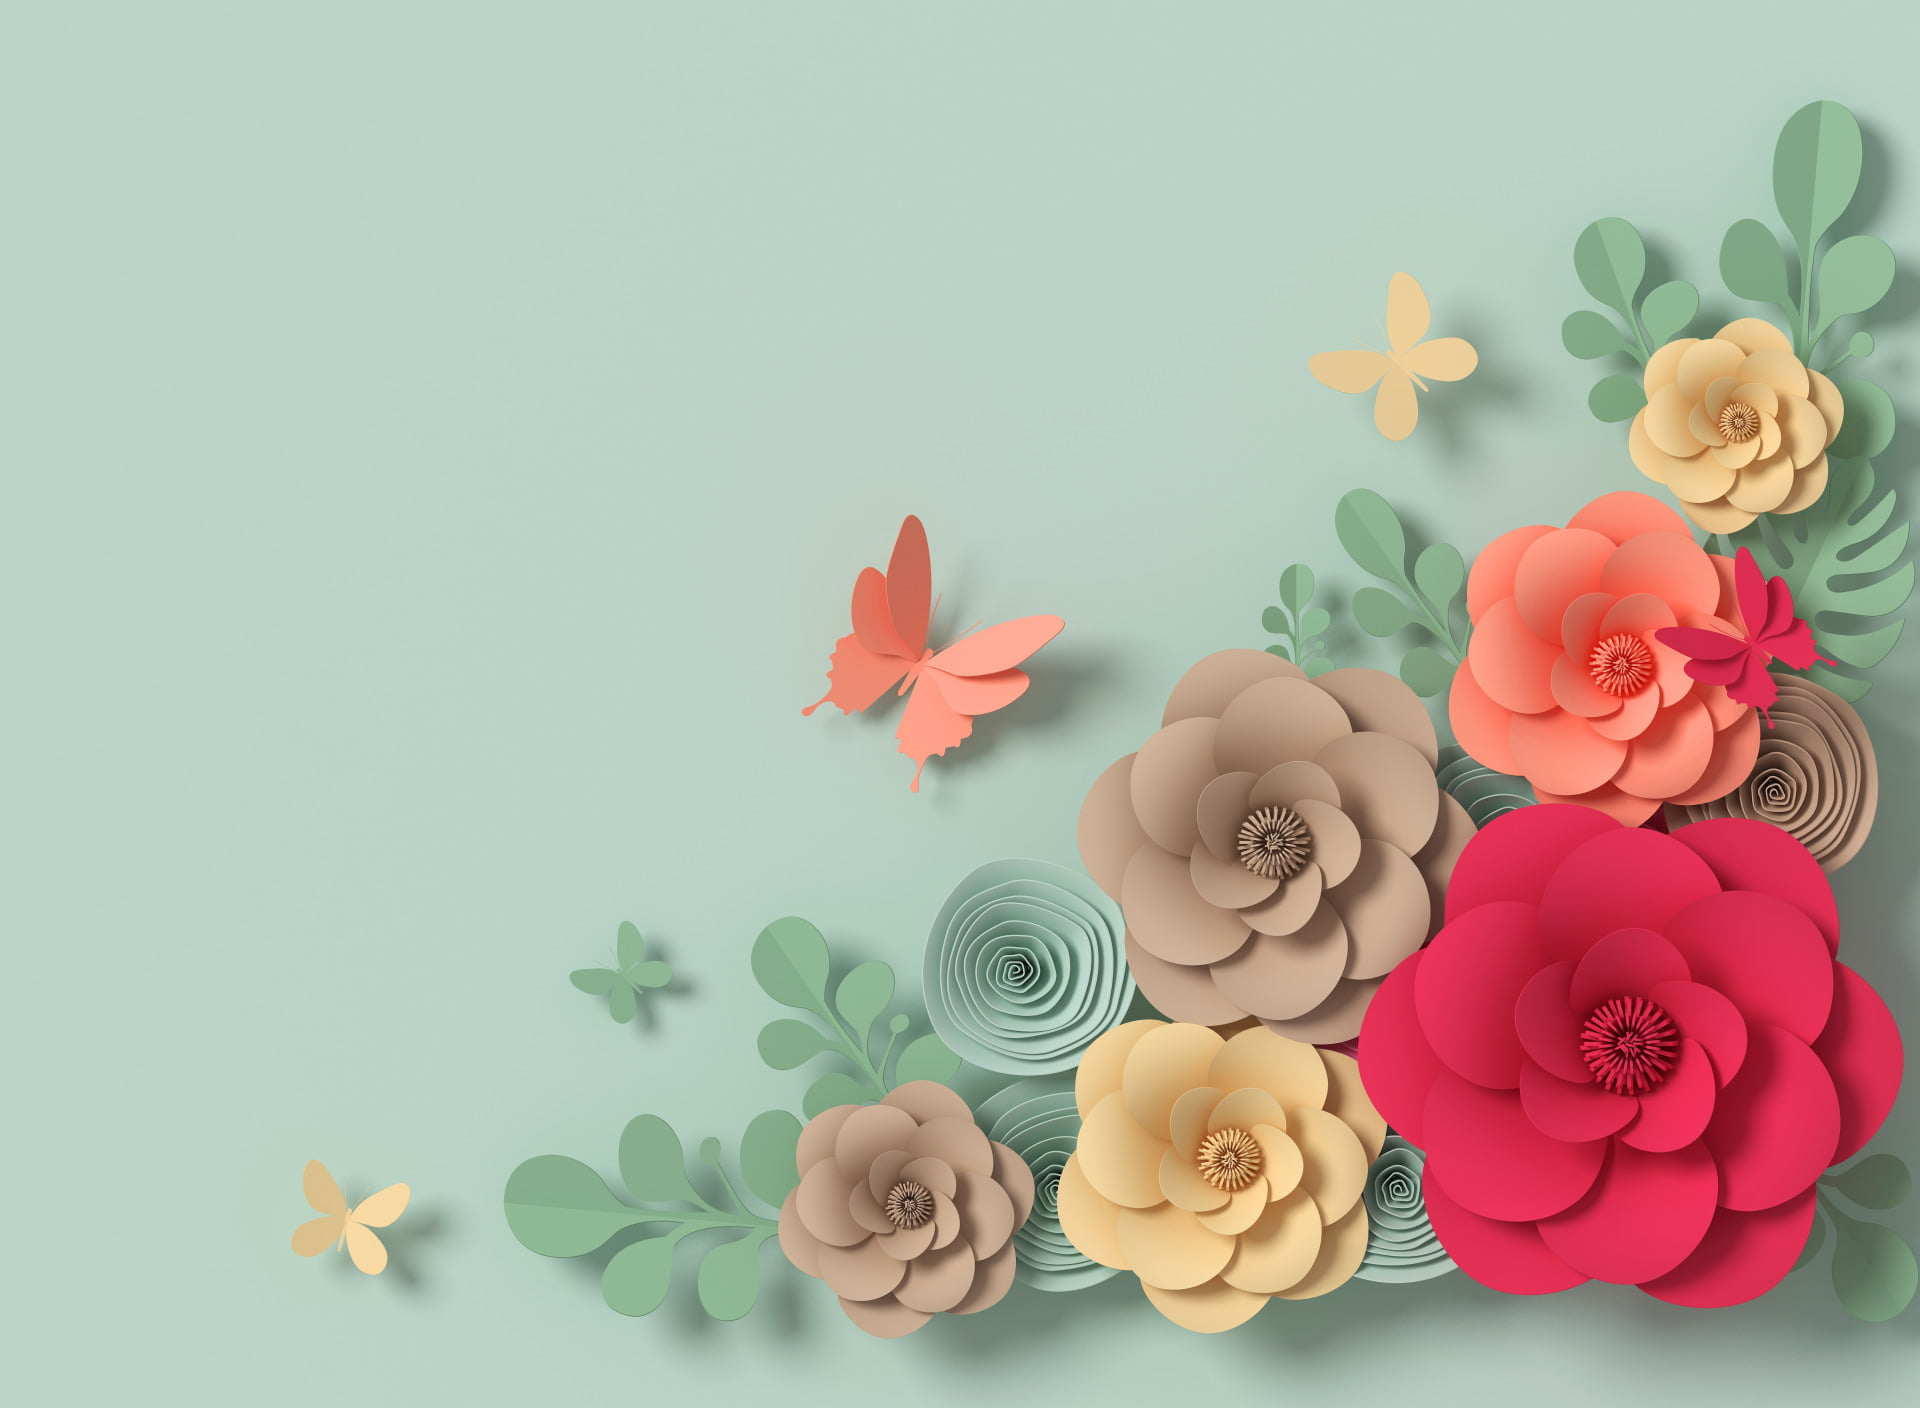 Flowers, Butterfly, Colorful, Floral, Pastel